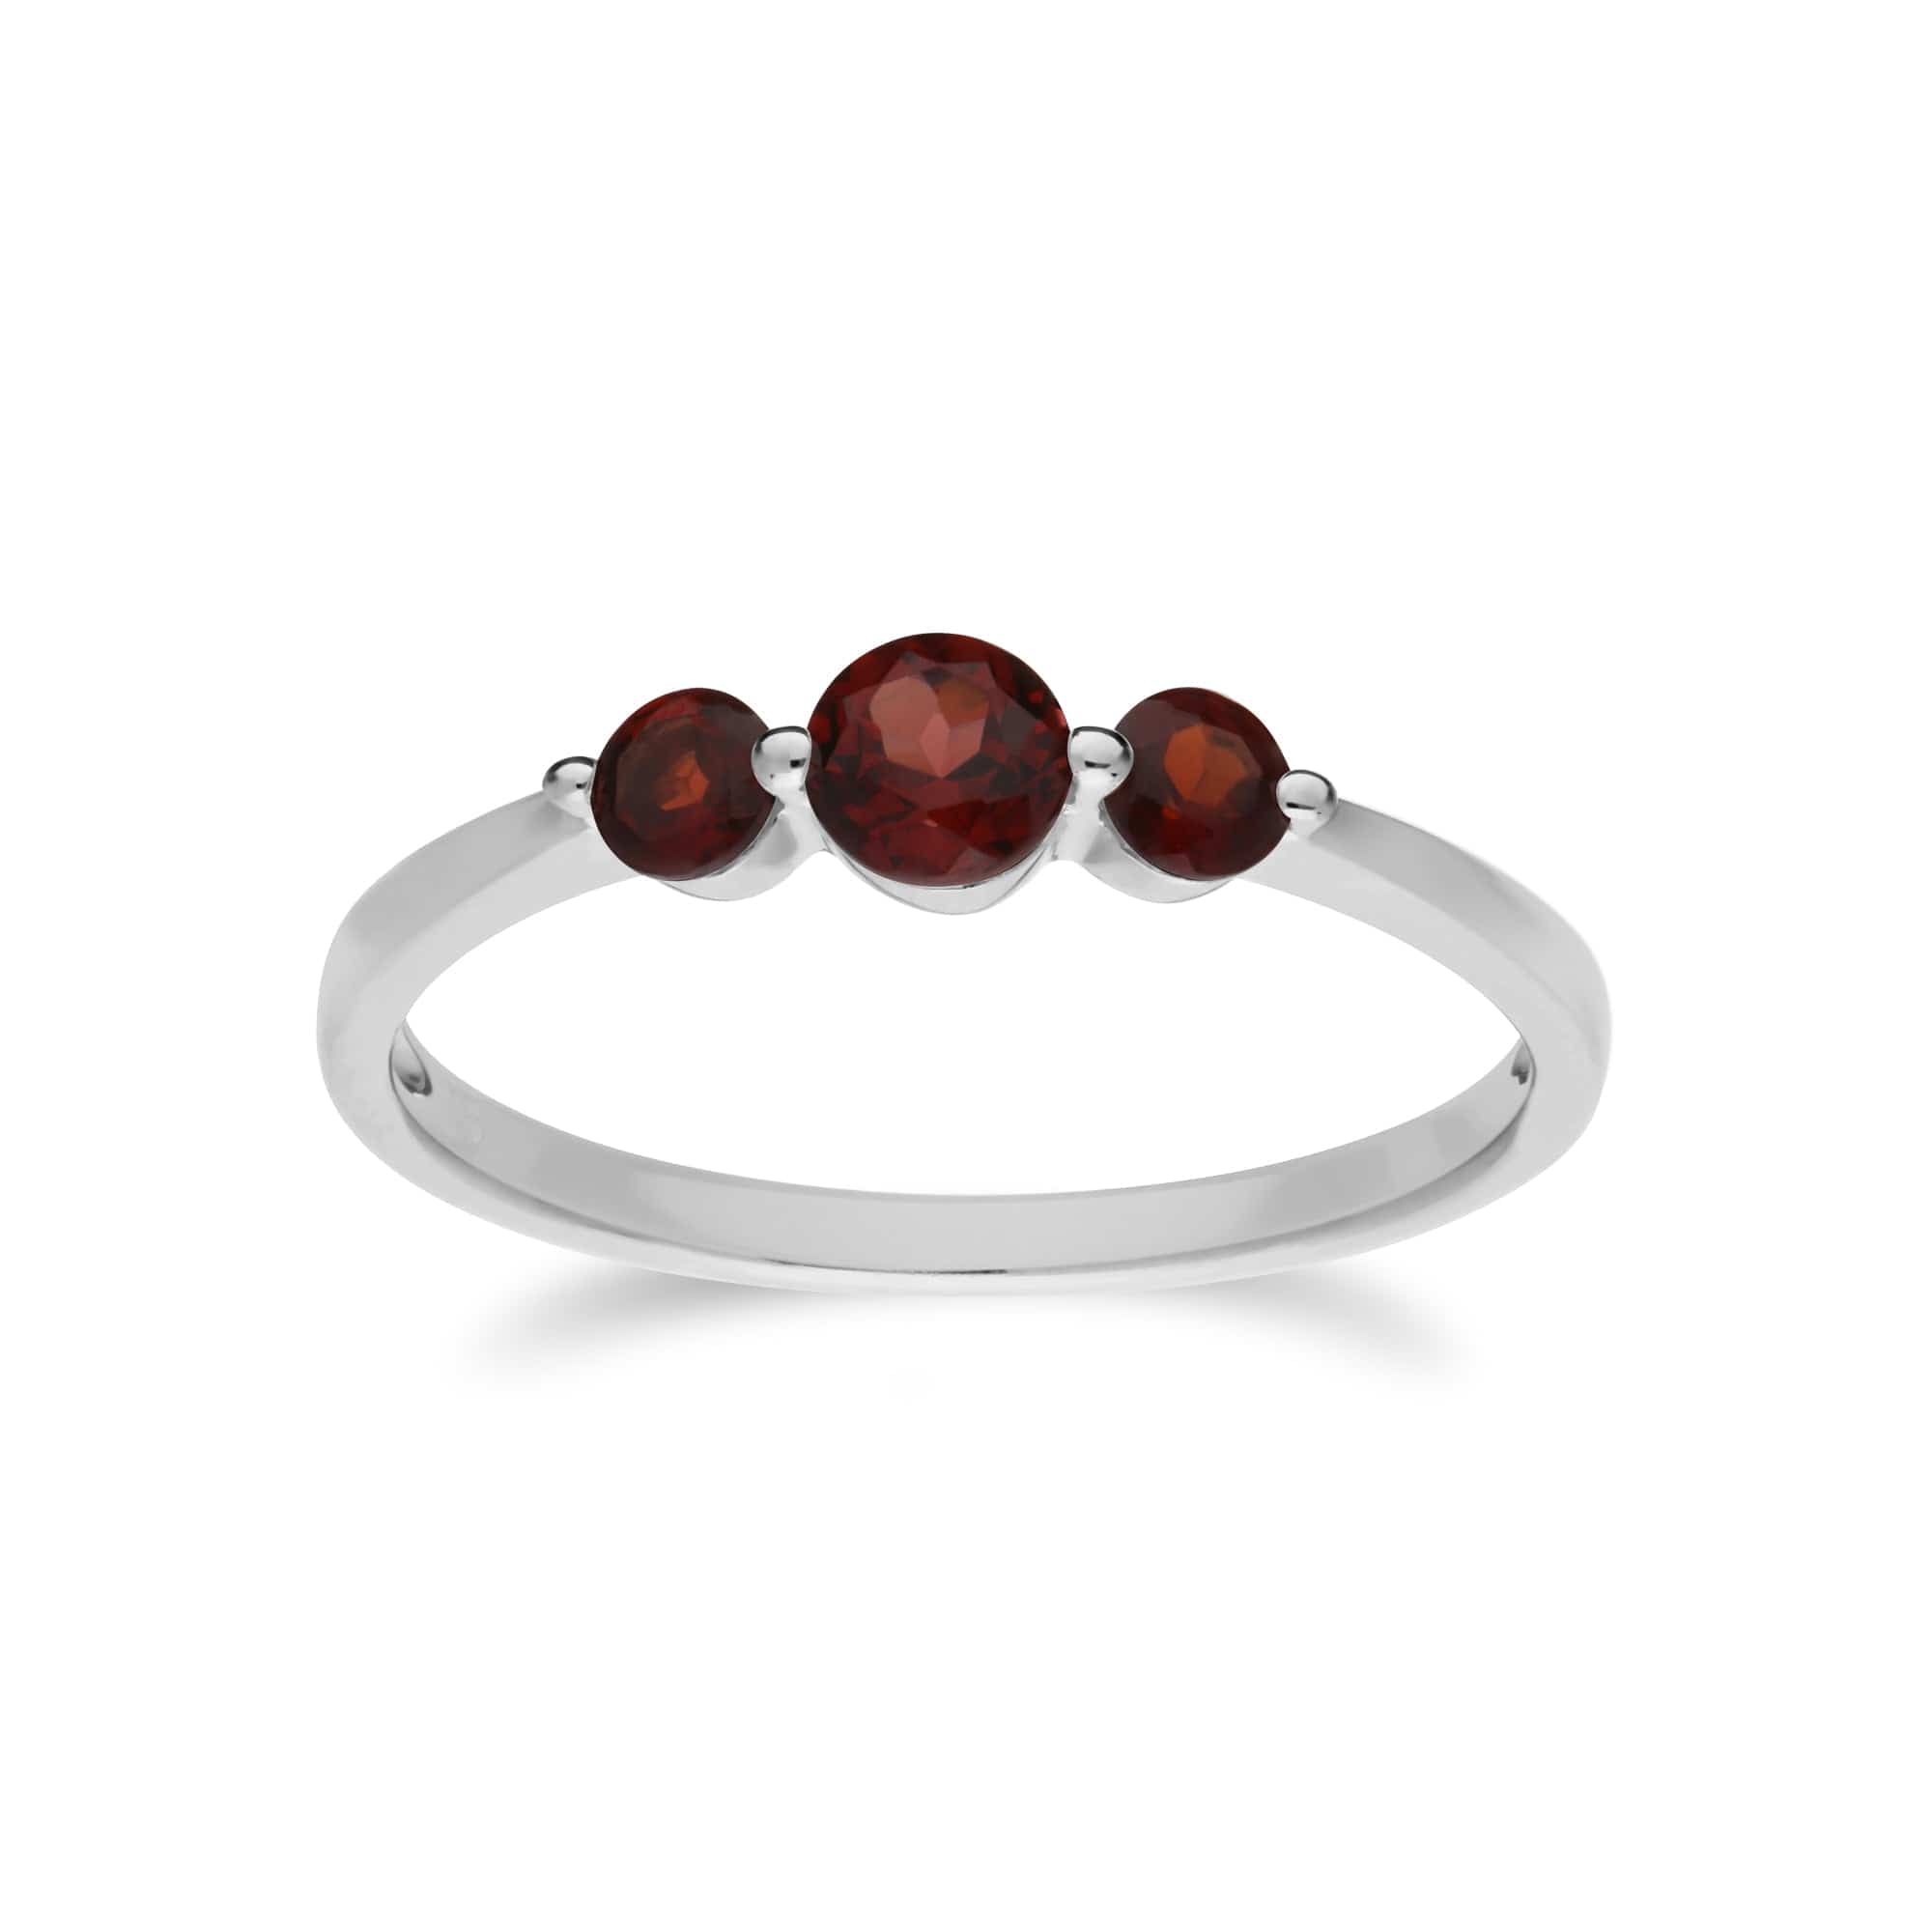 270E025502925-270R056002925 Classic Round Garnet Three Stone Gradient Earrings & Ring Set in 925 Sterling Silver 3